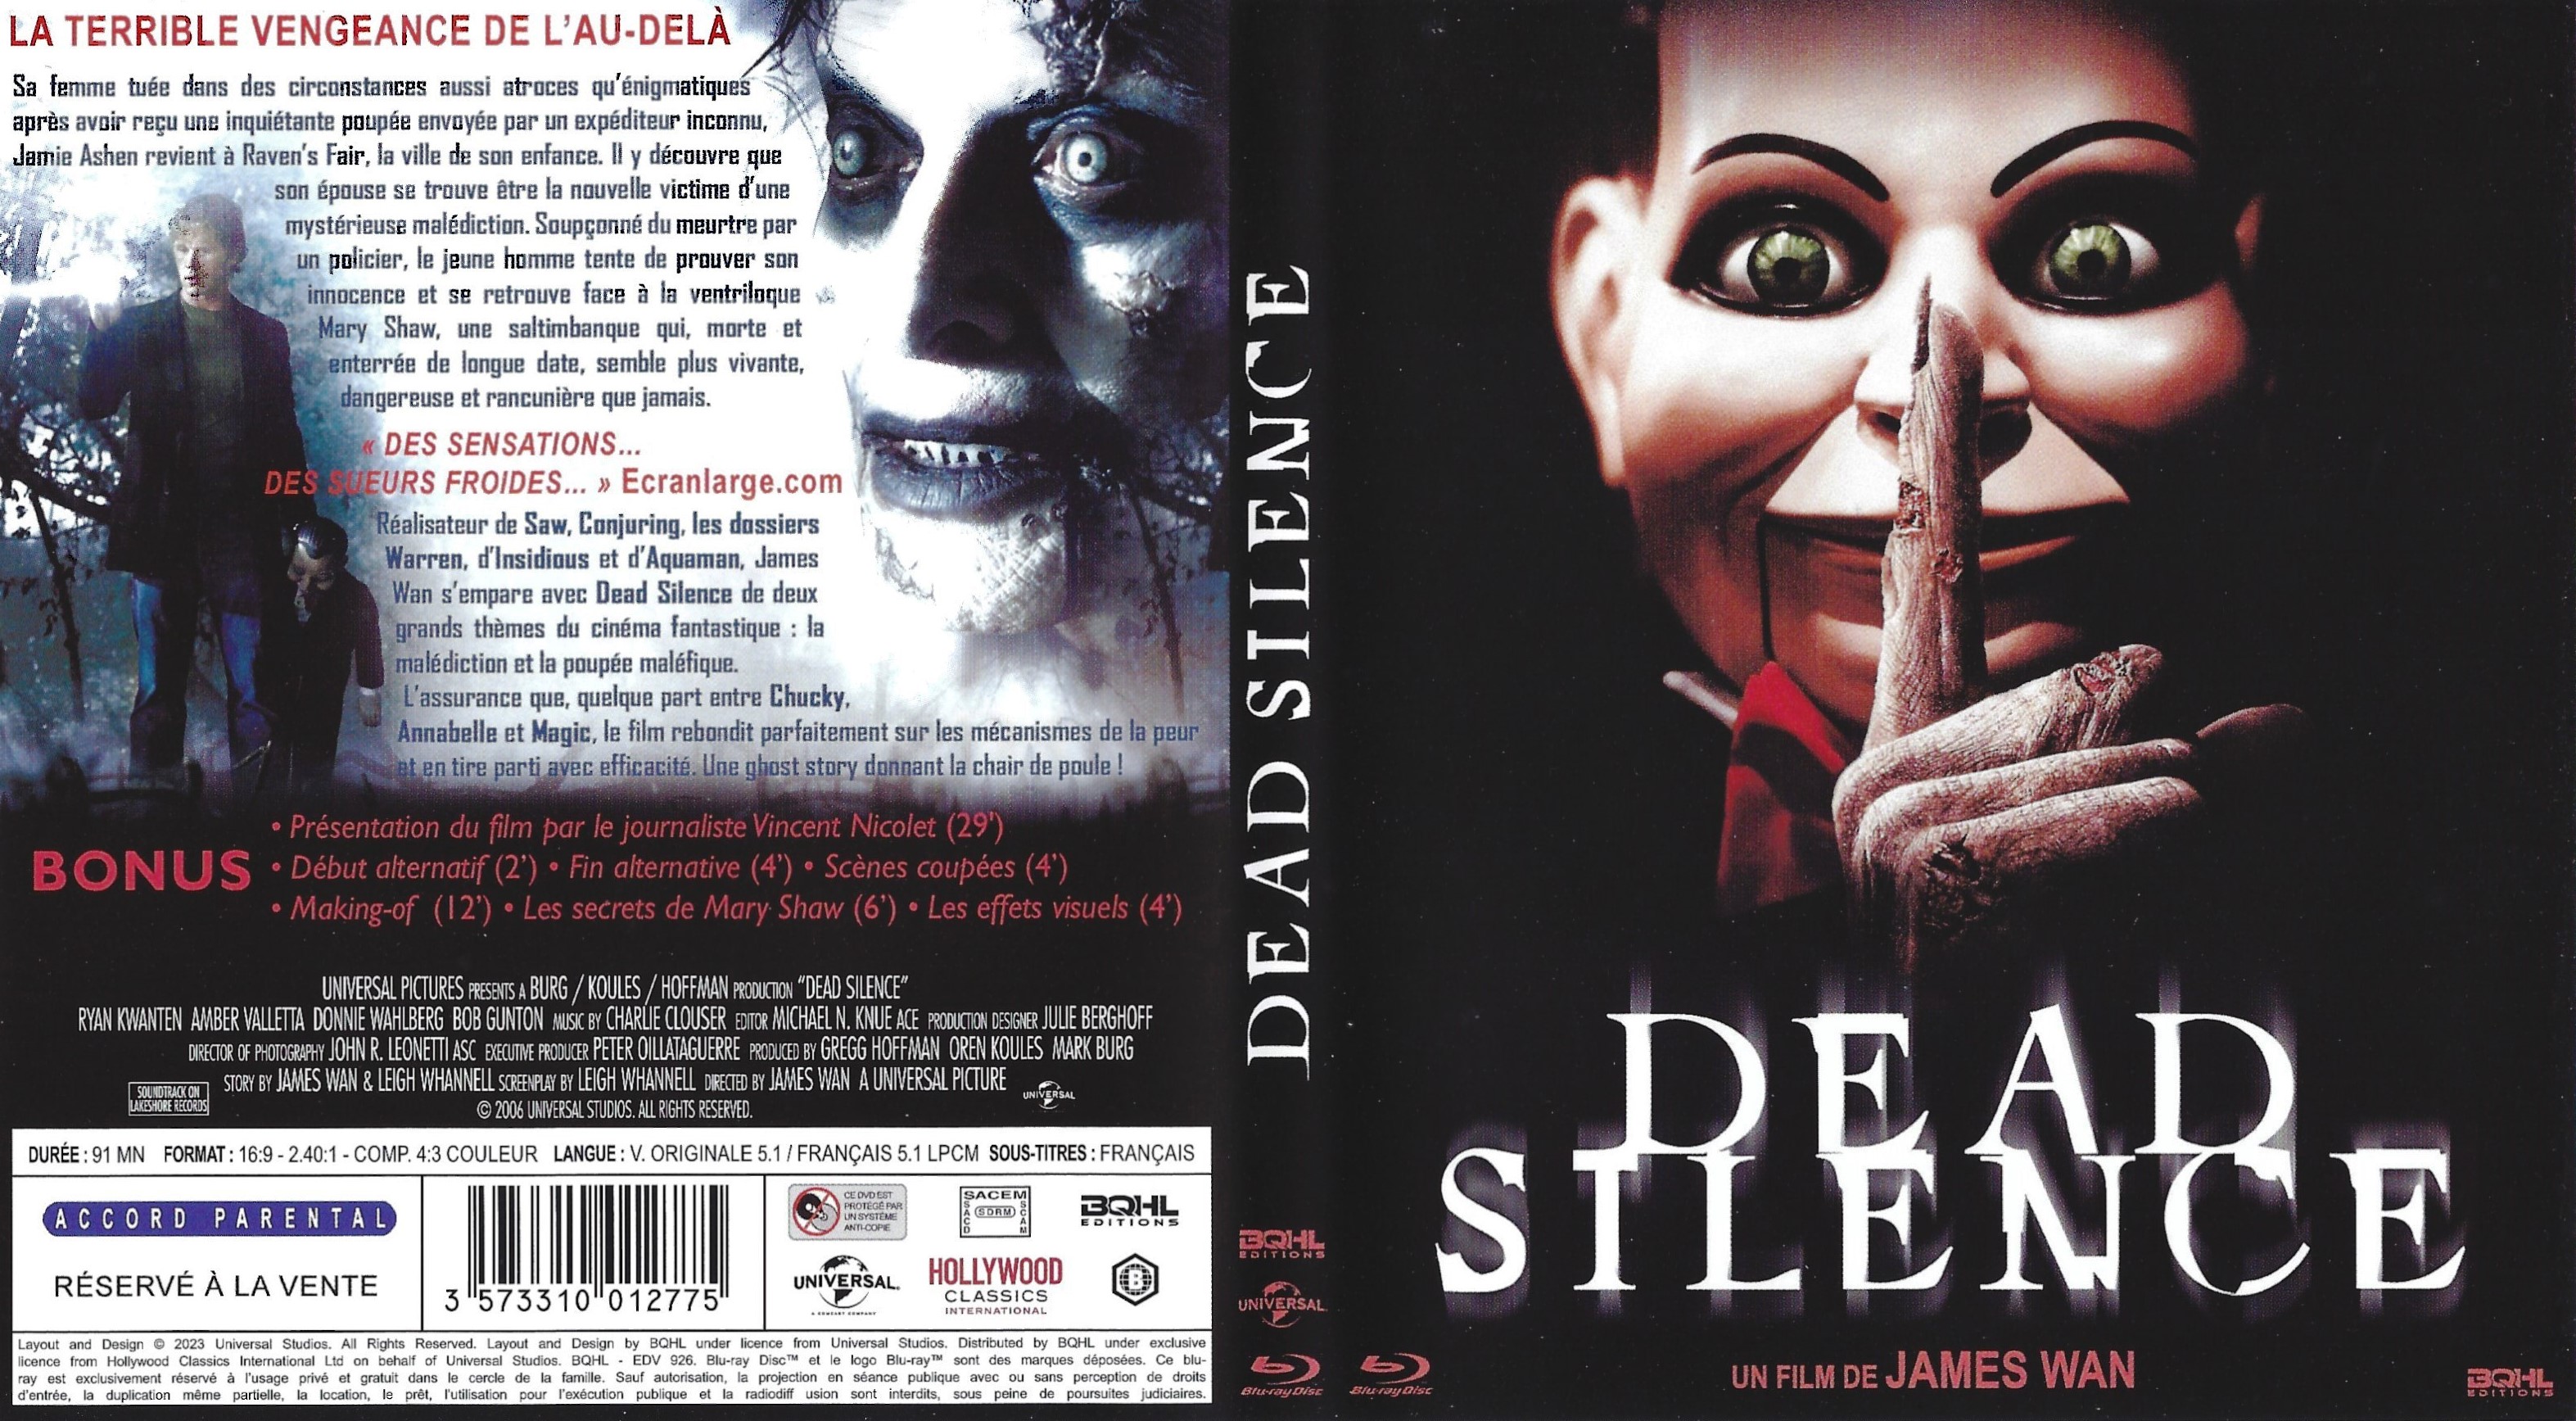 Jaquette DVD Dead Silence (BLU-RAY) v2